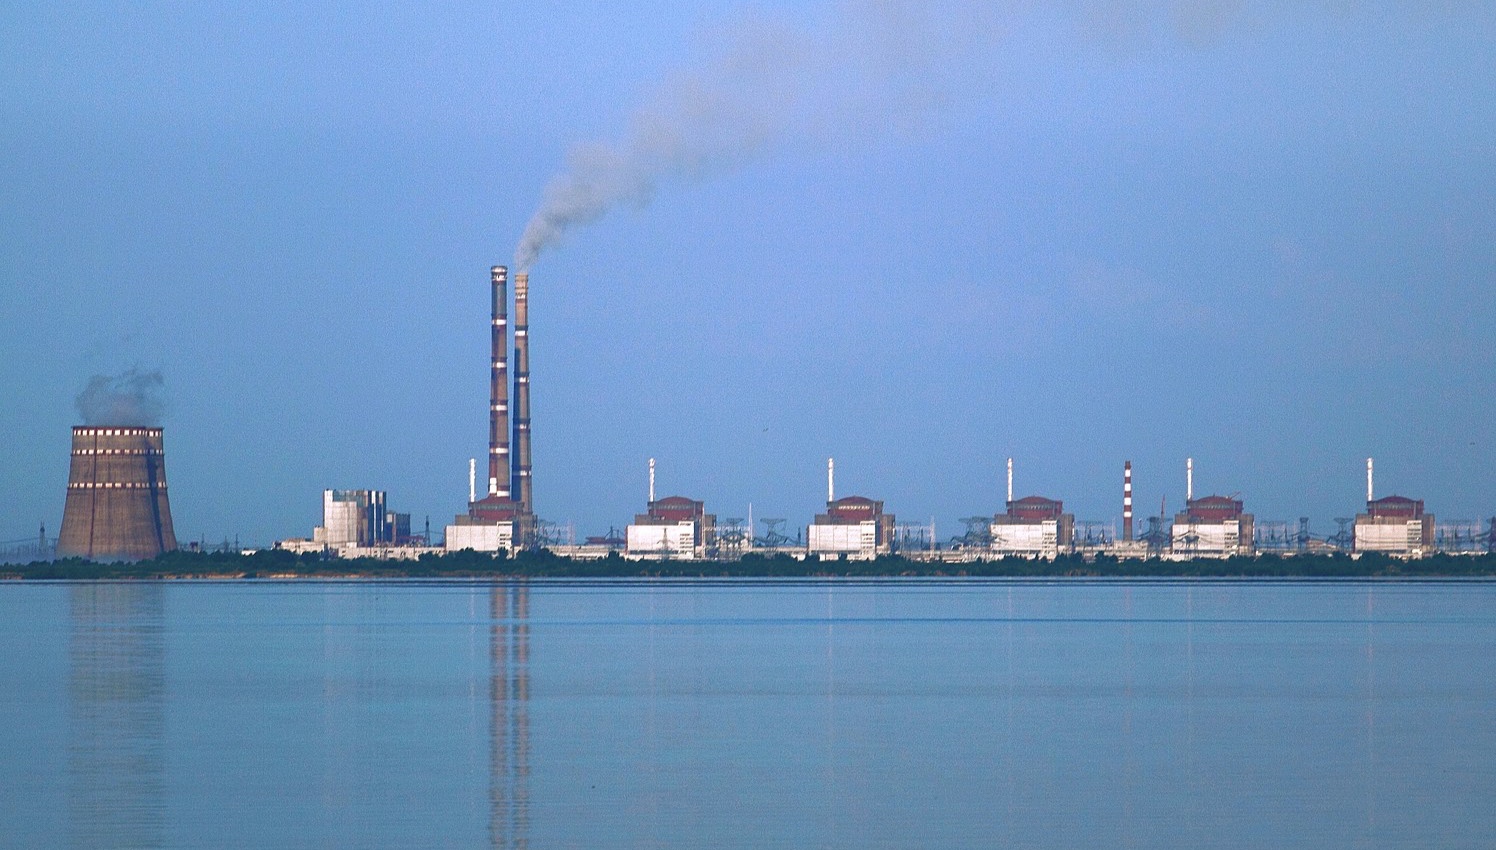 Russians break all safety rules at Zaporizhzhia Nuclear Power Plant